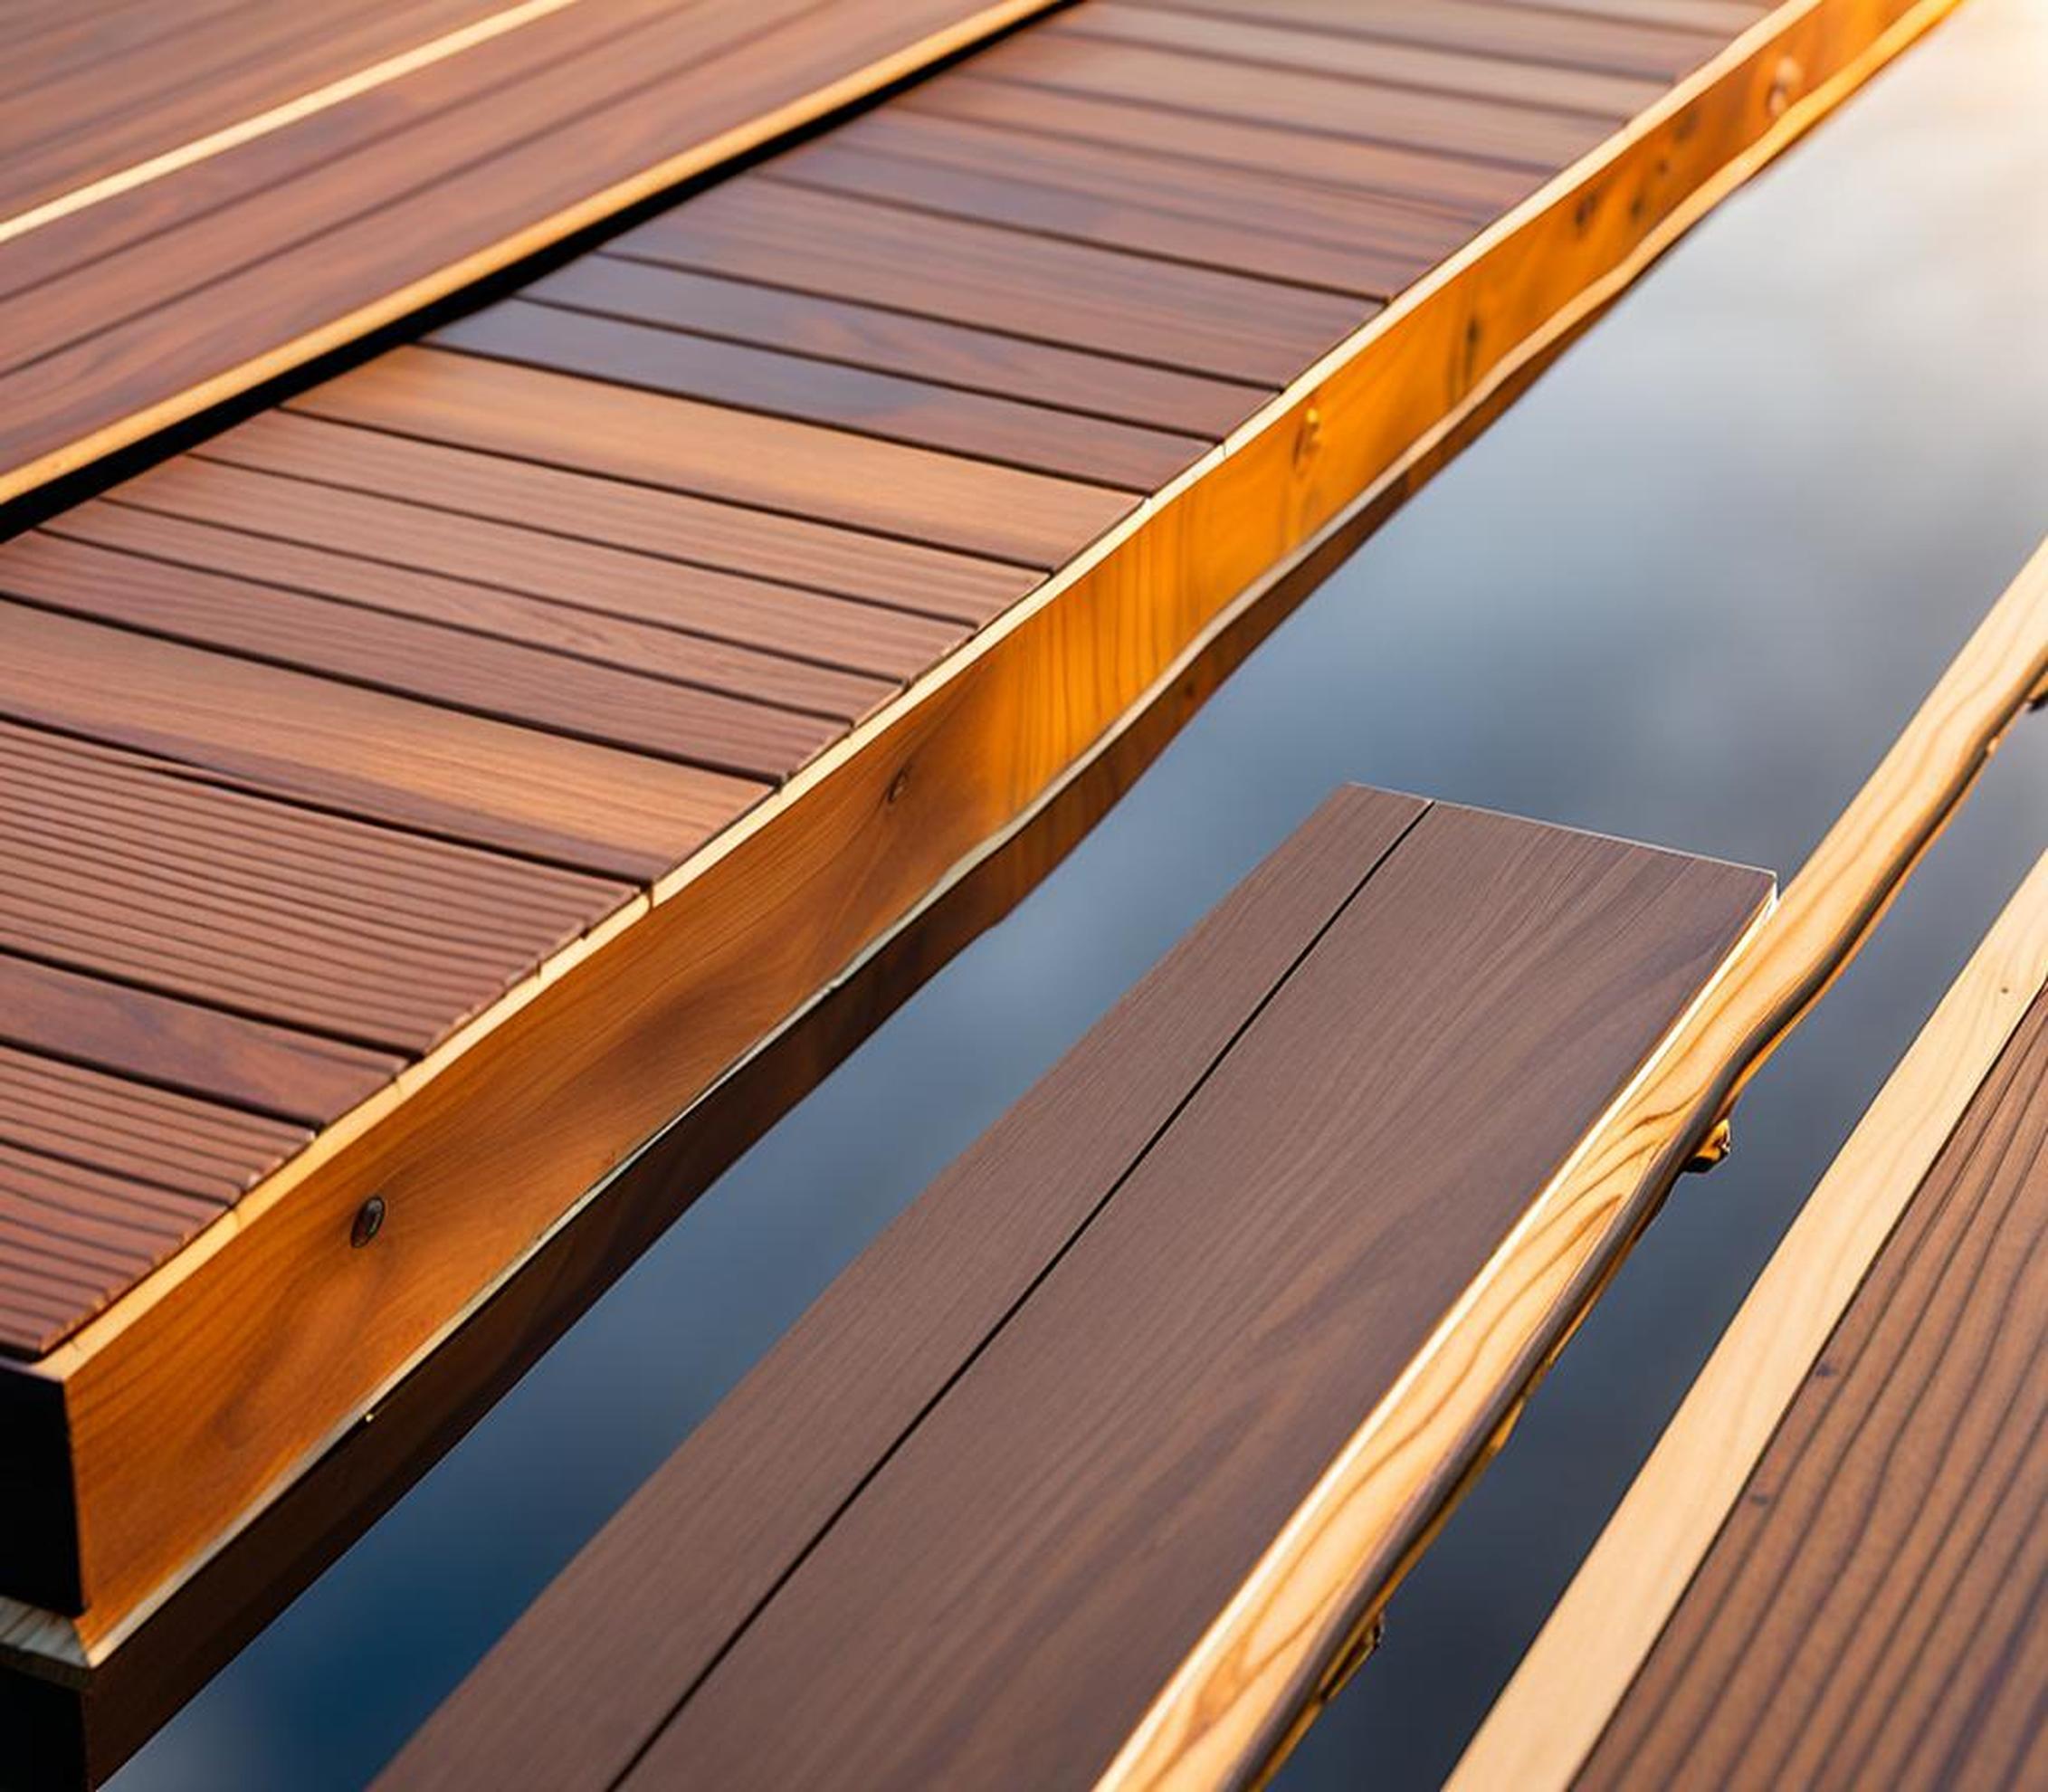 How Thick Should Your Deck Boards Be? We Have the Answer